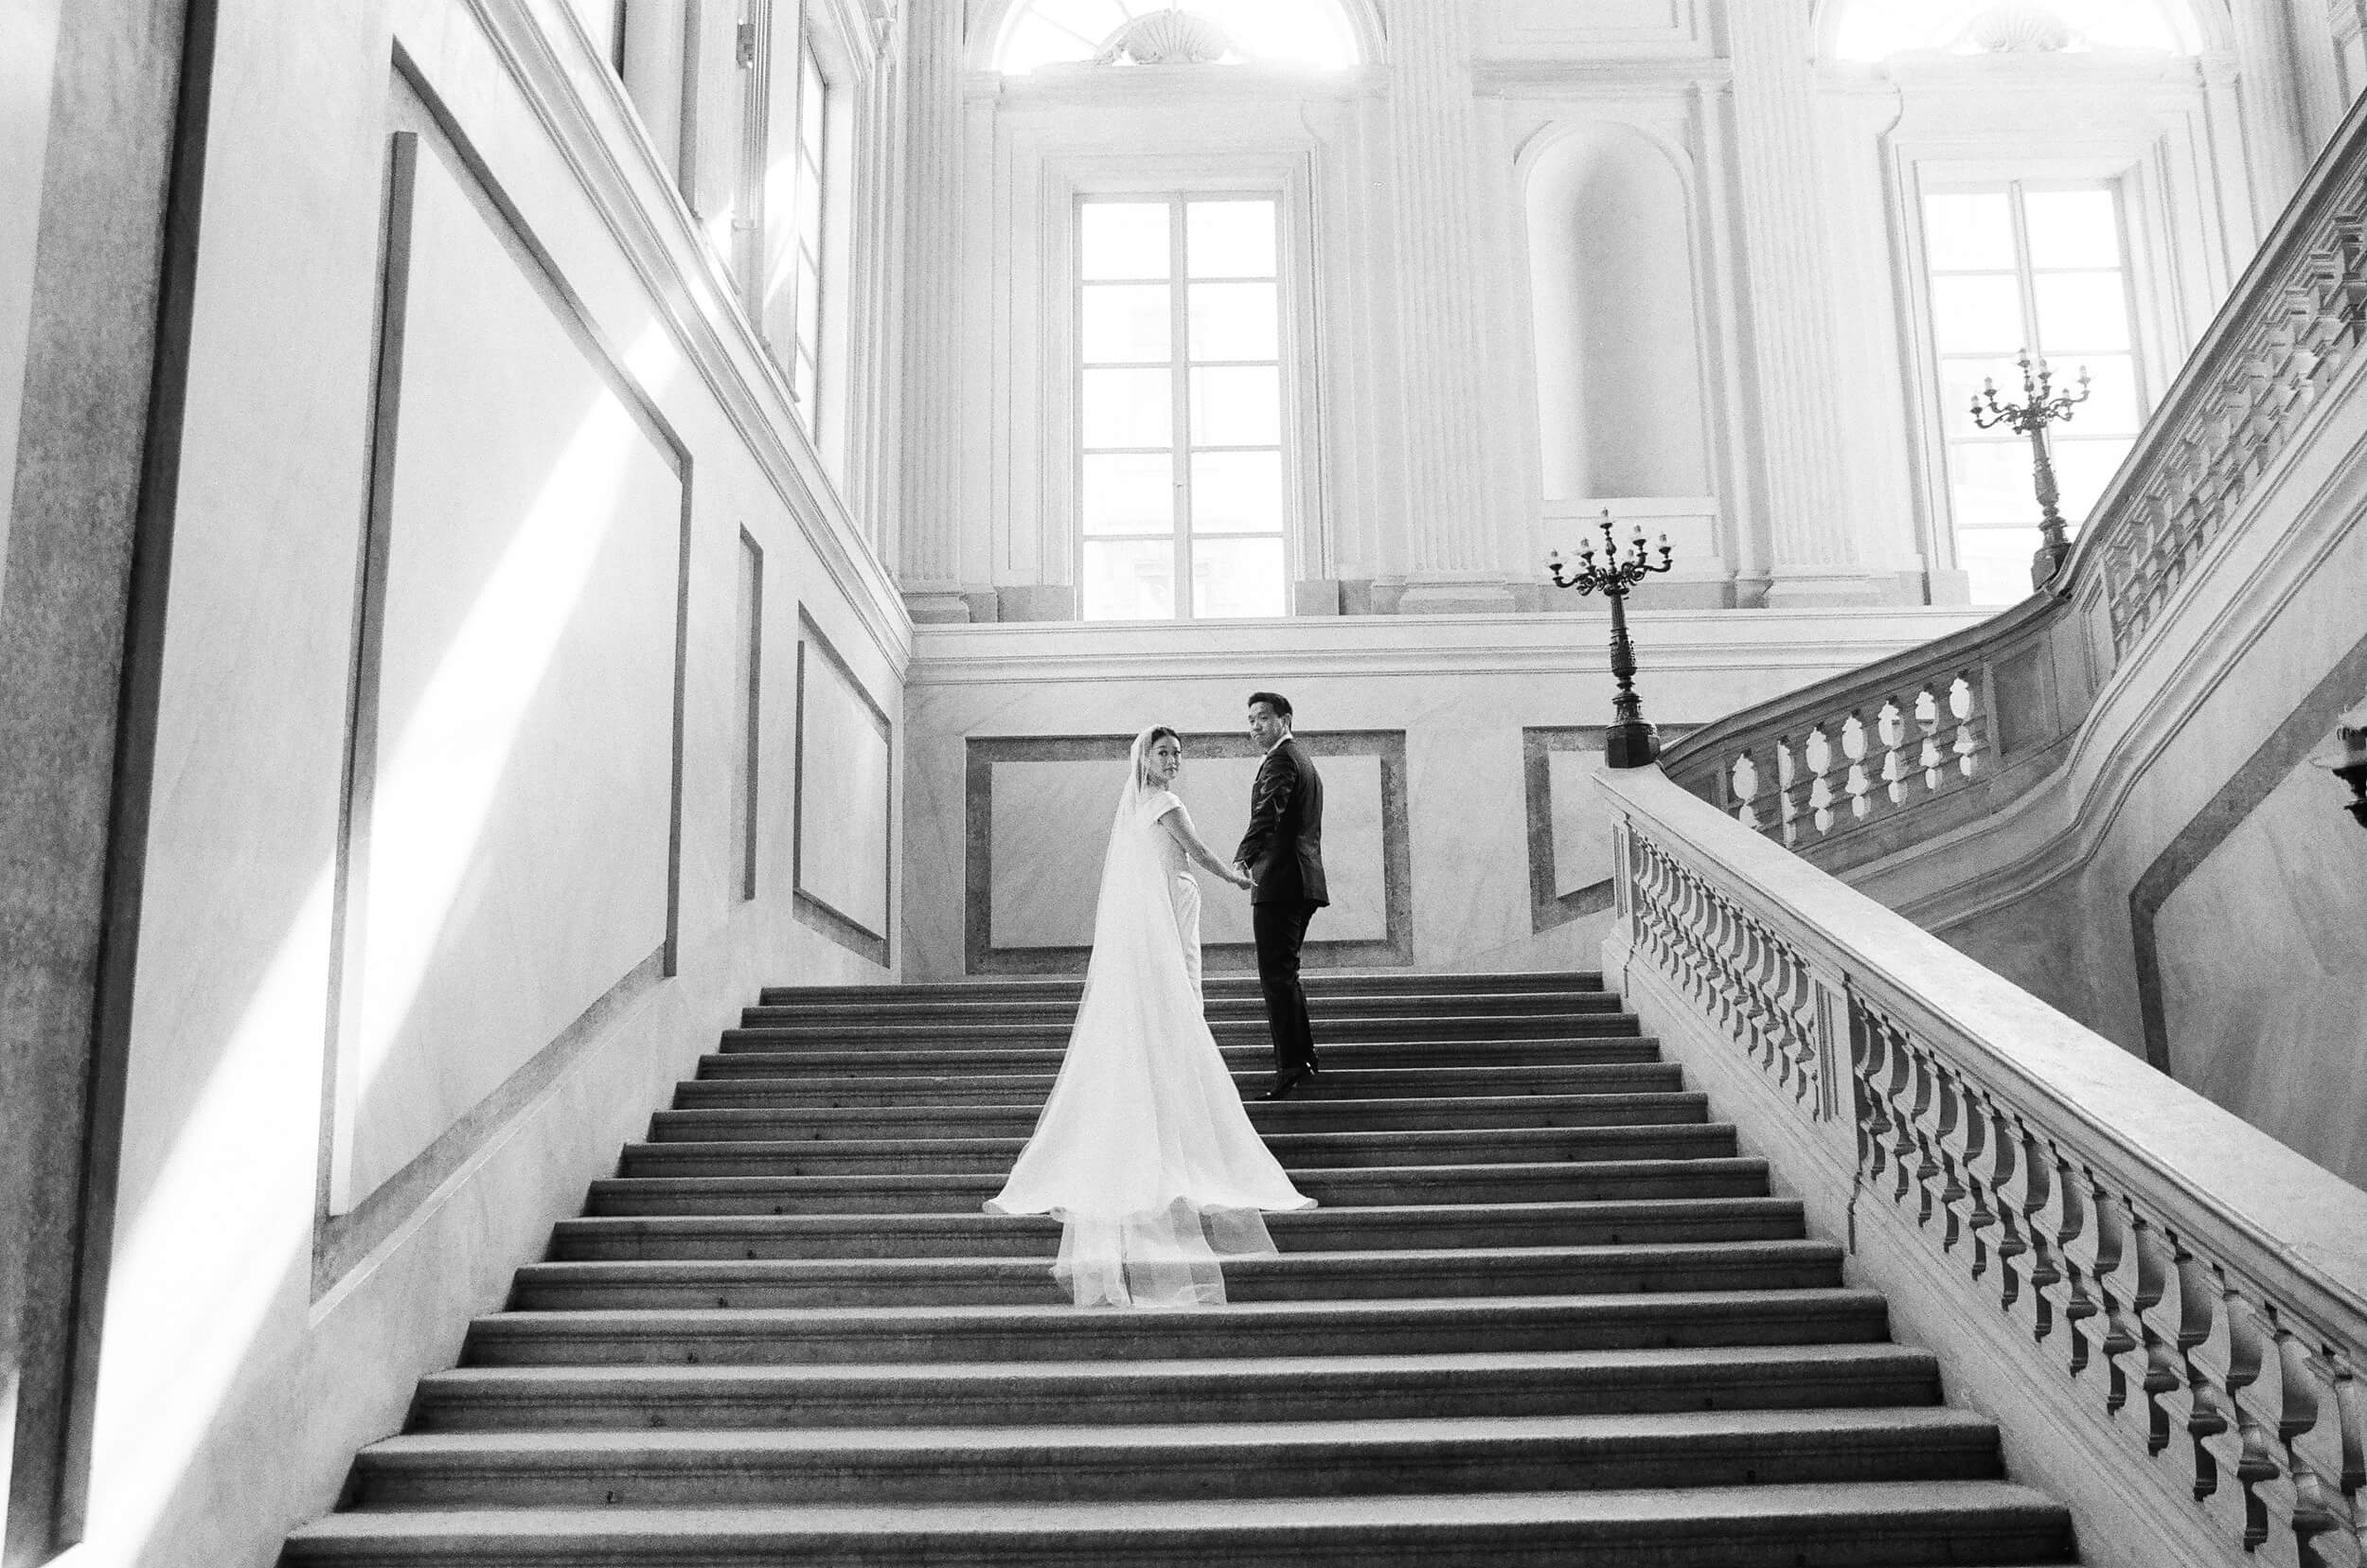 Bride and groom at the colossal staircase of  Chiesa di San Fedele